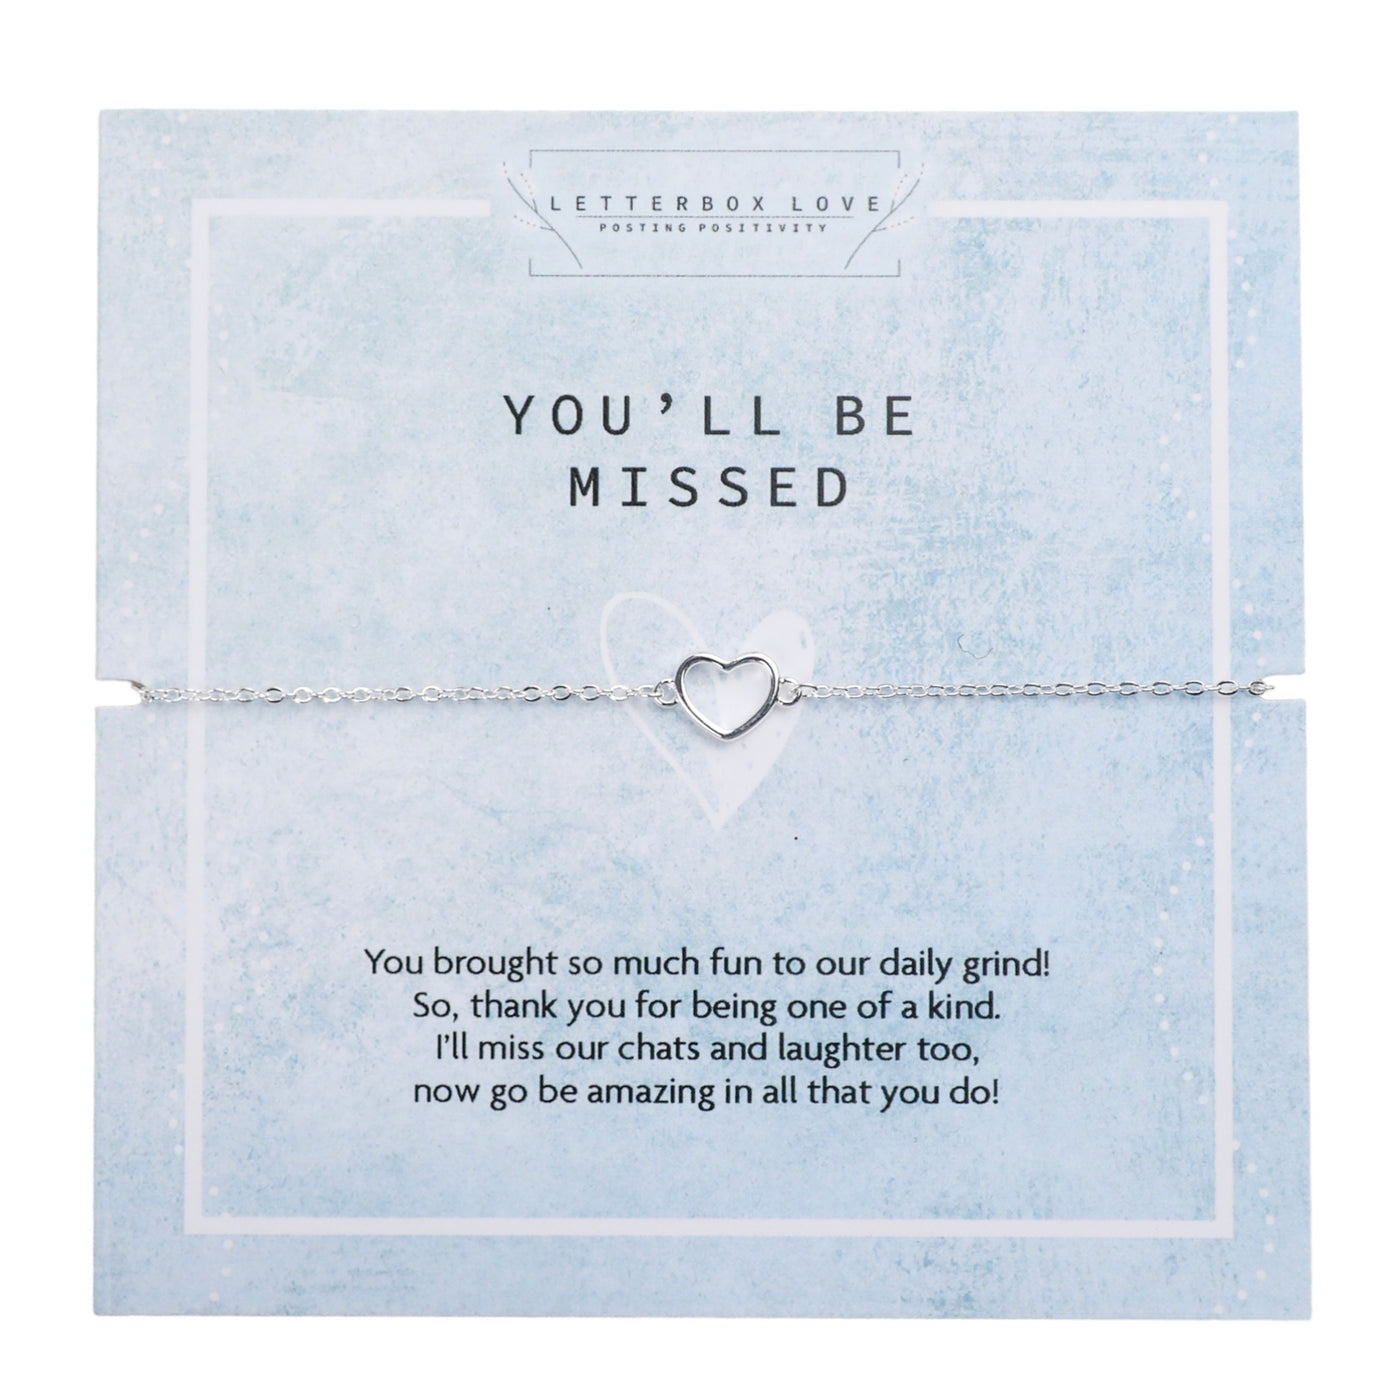 A farewell-themed bracelet card with a heart-shaped charm centered on a delicate silver chain. The card's pastel blue background is overlaid with the message 